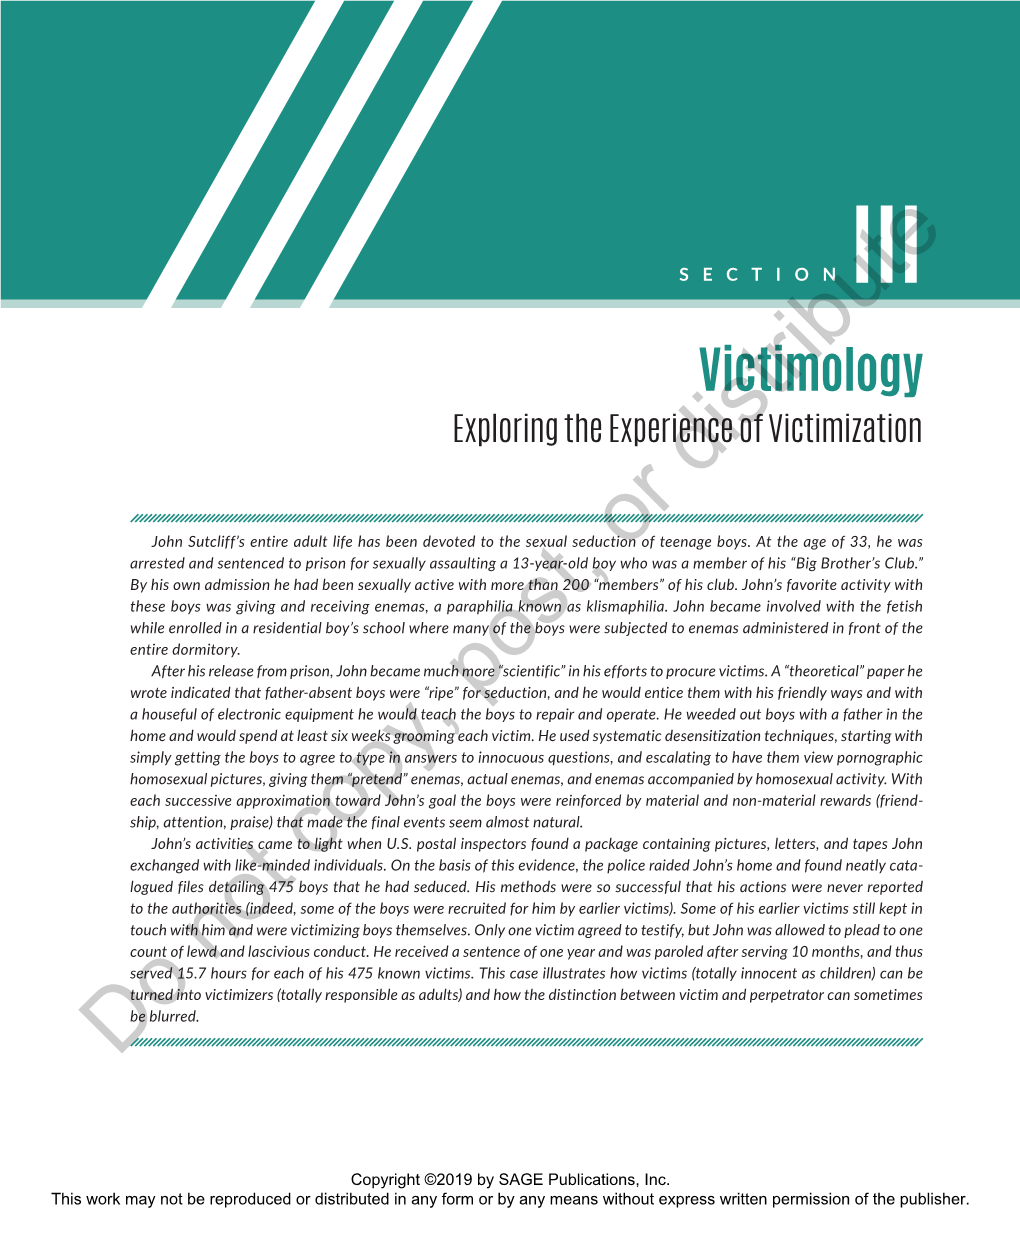 Victimology Exploring the Experience of Victimization Distribute